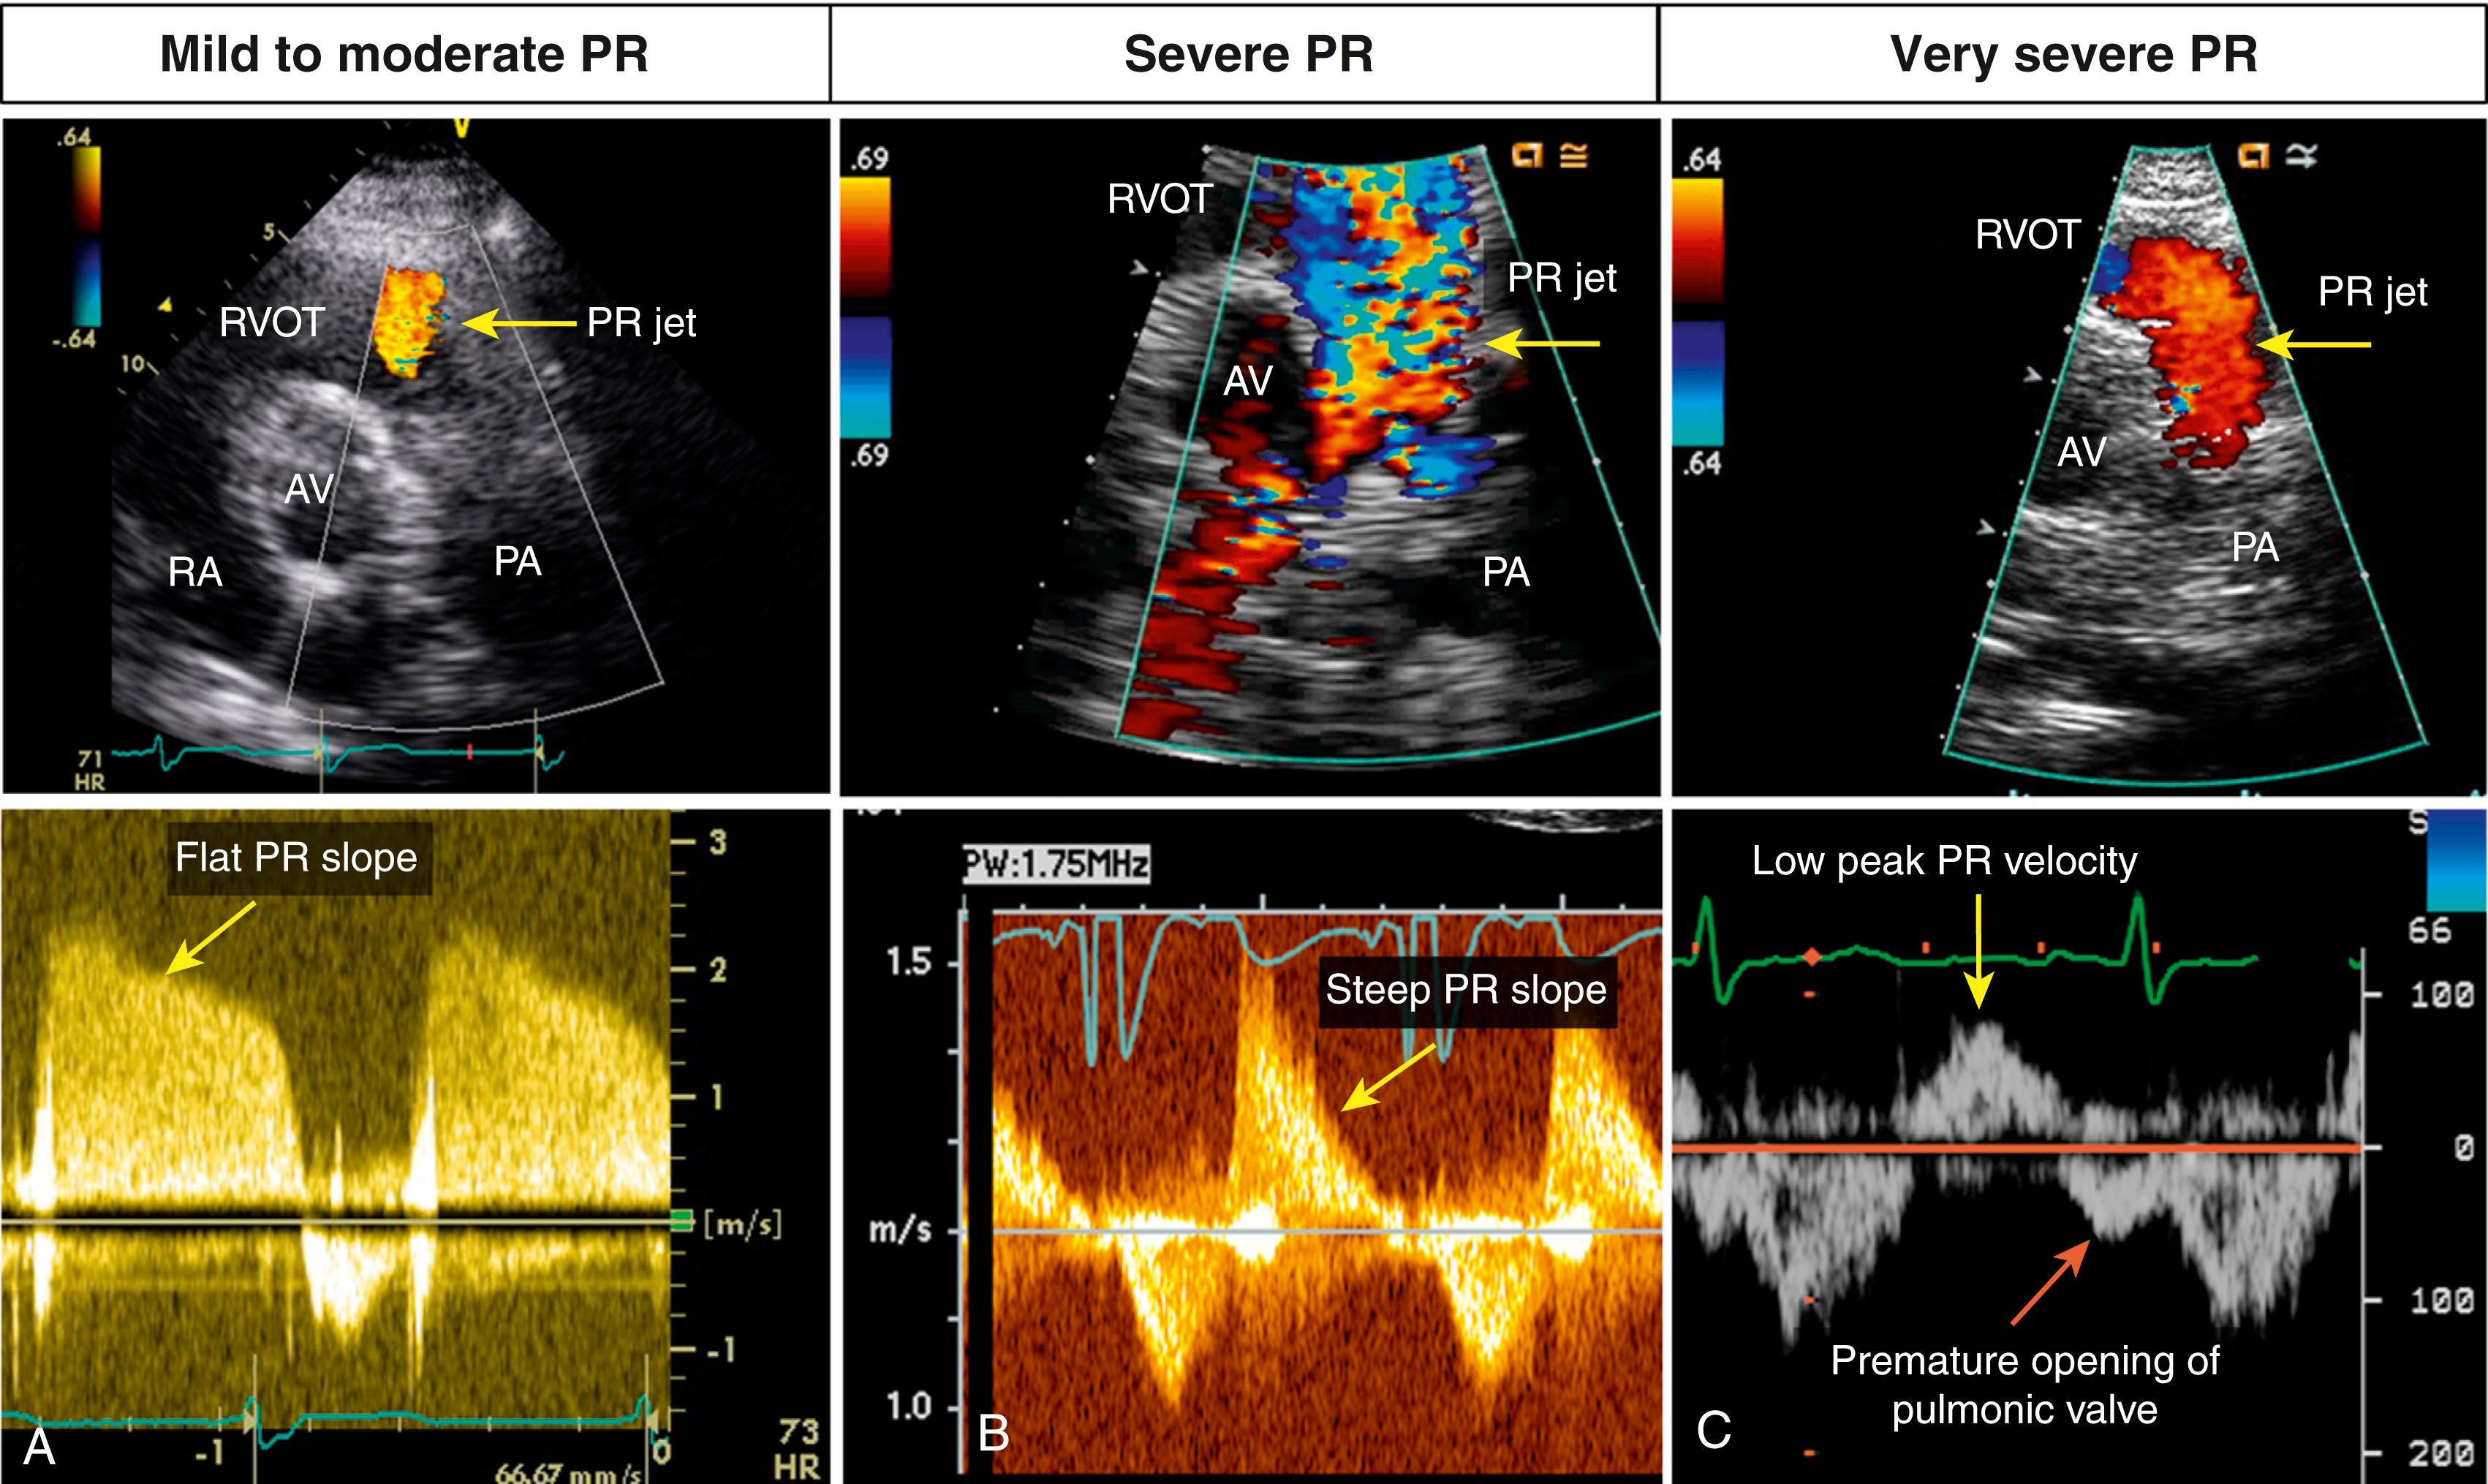 Figure 107.1, Color and spectral Doppler markers of pulmonic regurgitation (PR). Transthoracic short-axis view at the level of the aortic valve demonstrate color Doppler (top) and spectral Doppler (bottom) findings in mild to moderate, severe, and very severe PR. A. Mild to moderate PR . On color Doppler, the jet is small (arrow) , and vena contracta at the jet origin is narrow. On spectral Doppler, the slope of PR jet is relatively flat (arrow) . B, Severe PR. On color Doppler, the jet is large and turbulent (arrow) , but on spectral Doppler, the PR slope is steep (arrow) . C, Very severe PR. On color Doppler, the jet is laminar (arrow) and of short duration. On spectral Doppler, there is a low peak velocity of PR jet (yellow arrow) , and there is premature opening of pulmonic valve with abnormal antegrade flow in late diastole. AV, Aortic valve; RA, right atrium; RVOT, right ventricular outflow tract. (See accompanying Video 107.1A , Video 107.1B , Video 107.1C .)